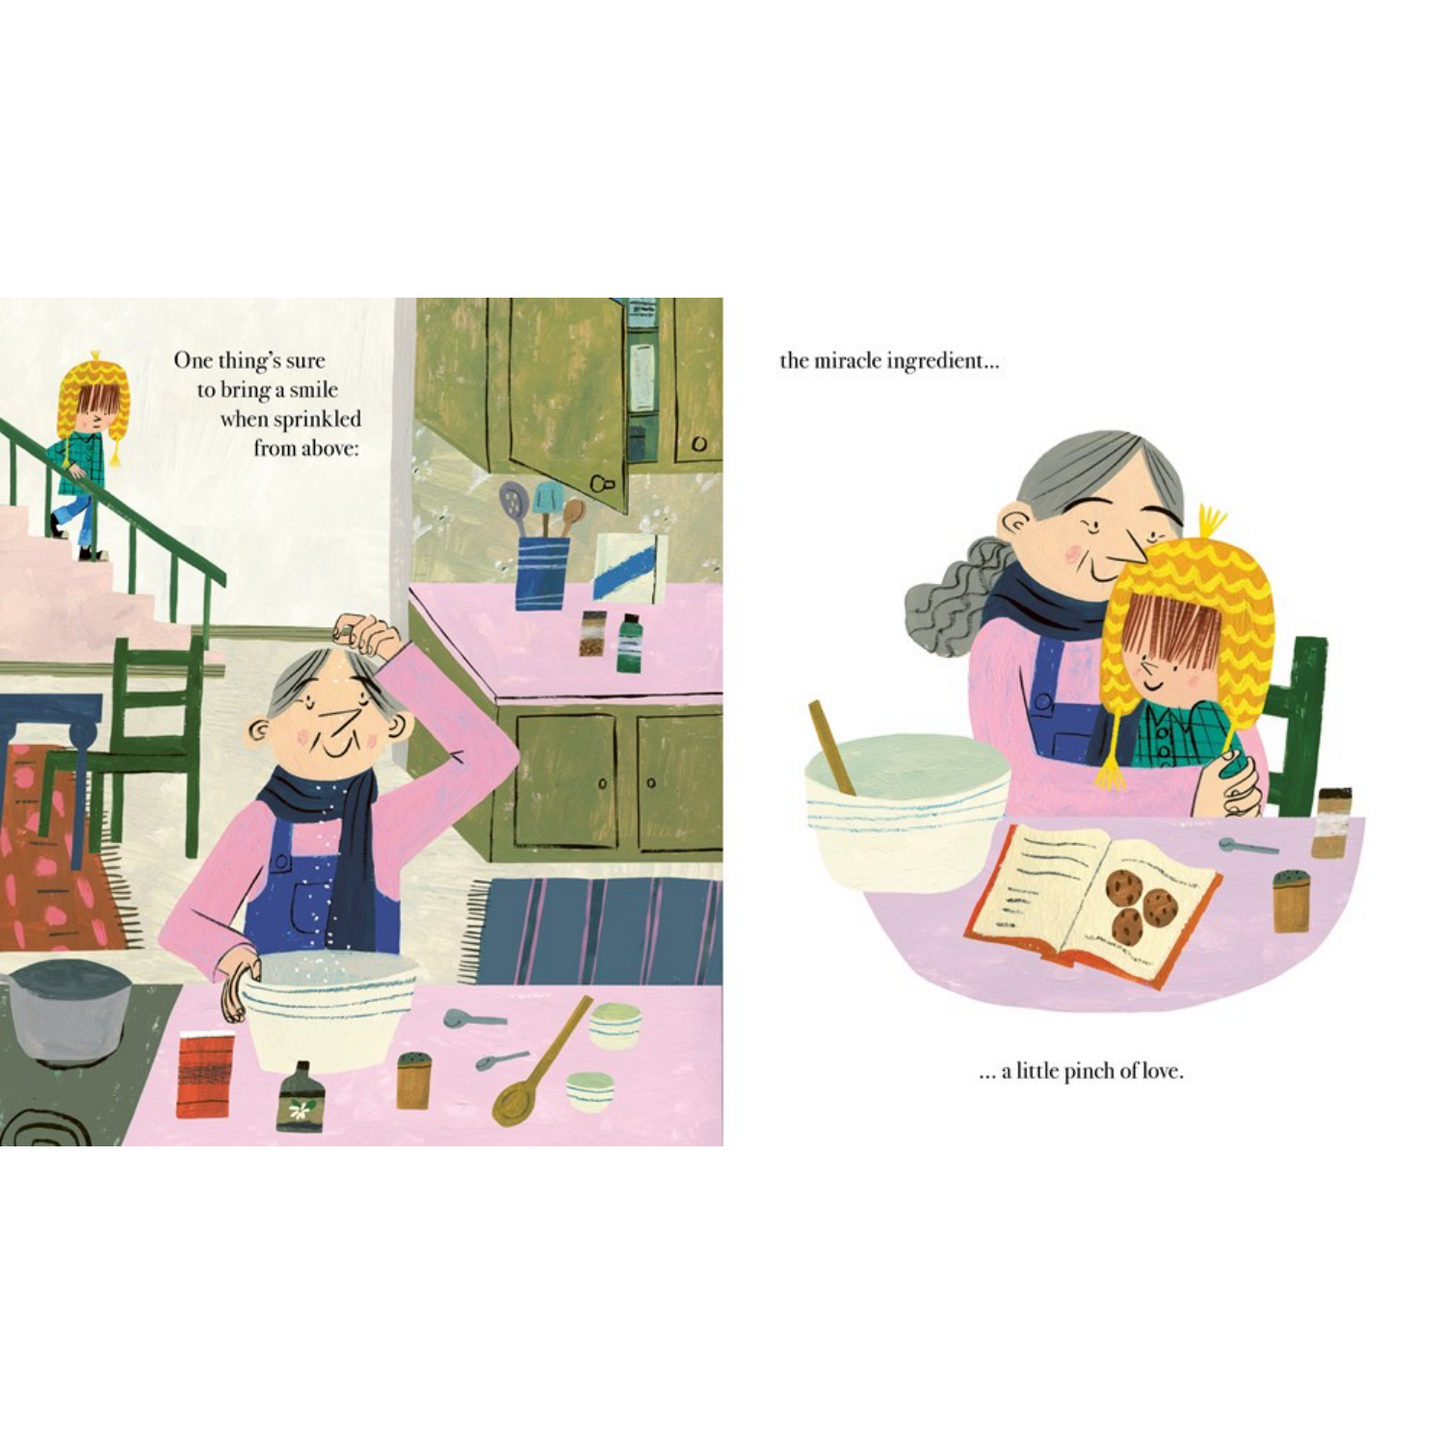 A Pinch of Love | Children's Book on Emotions & Feelings